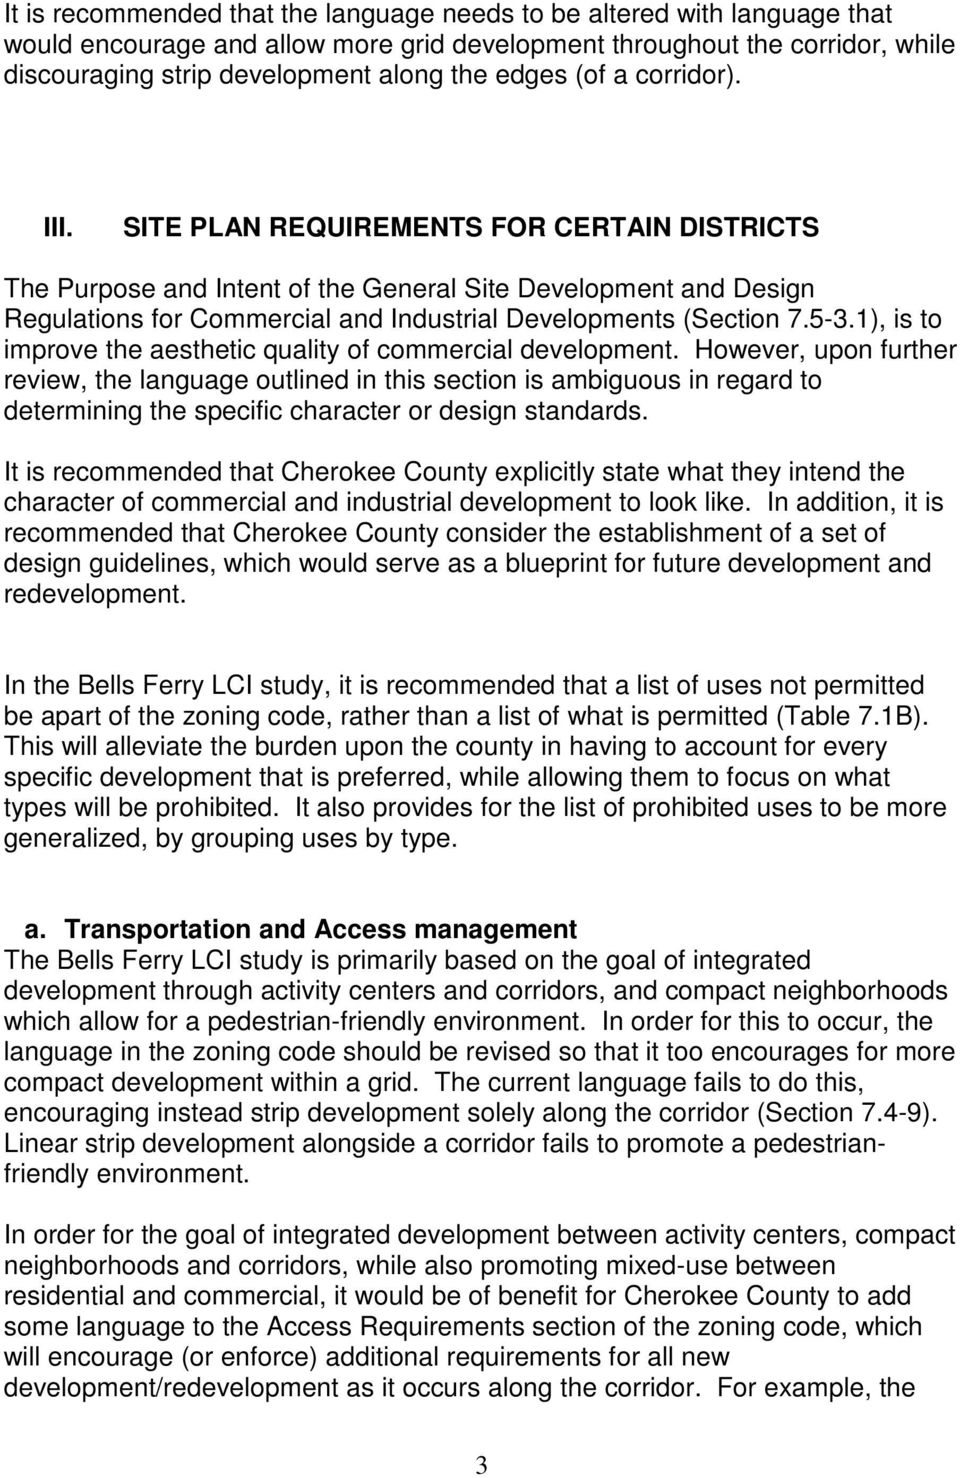 SITE PLAN REQUIREMENTS FOR CERTAIN DISTRICTS The Purpose and Intent of the General Site Development and Design Regulations for Commercial and Industrial Developments (Section 7.5-3.